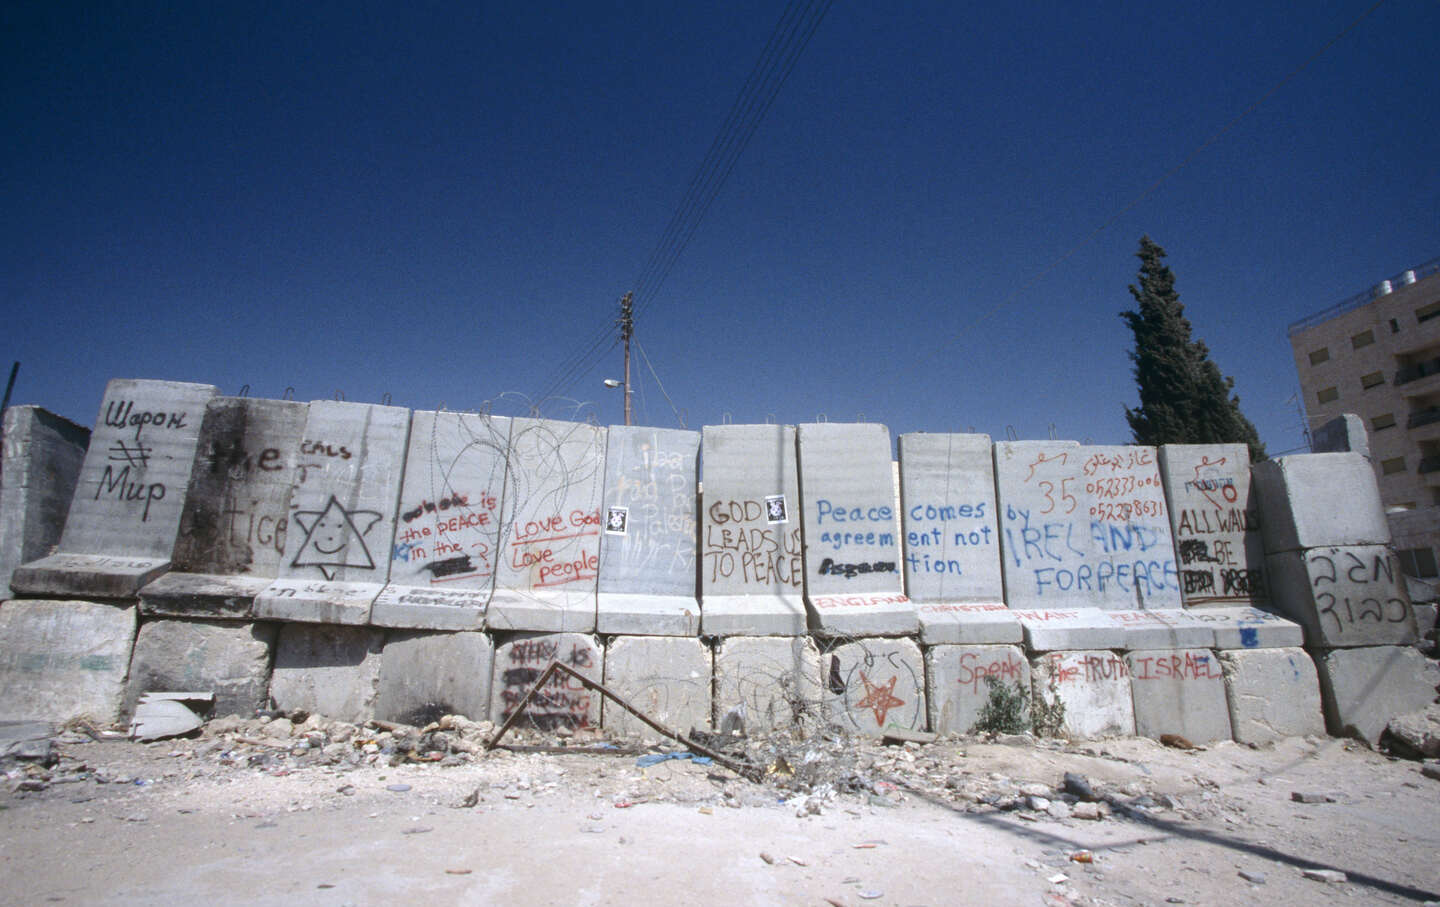 A wall separating Israel and the West Bank.